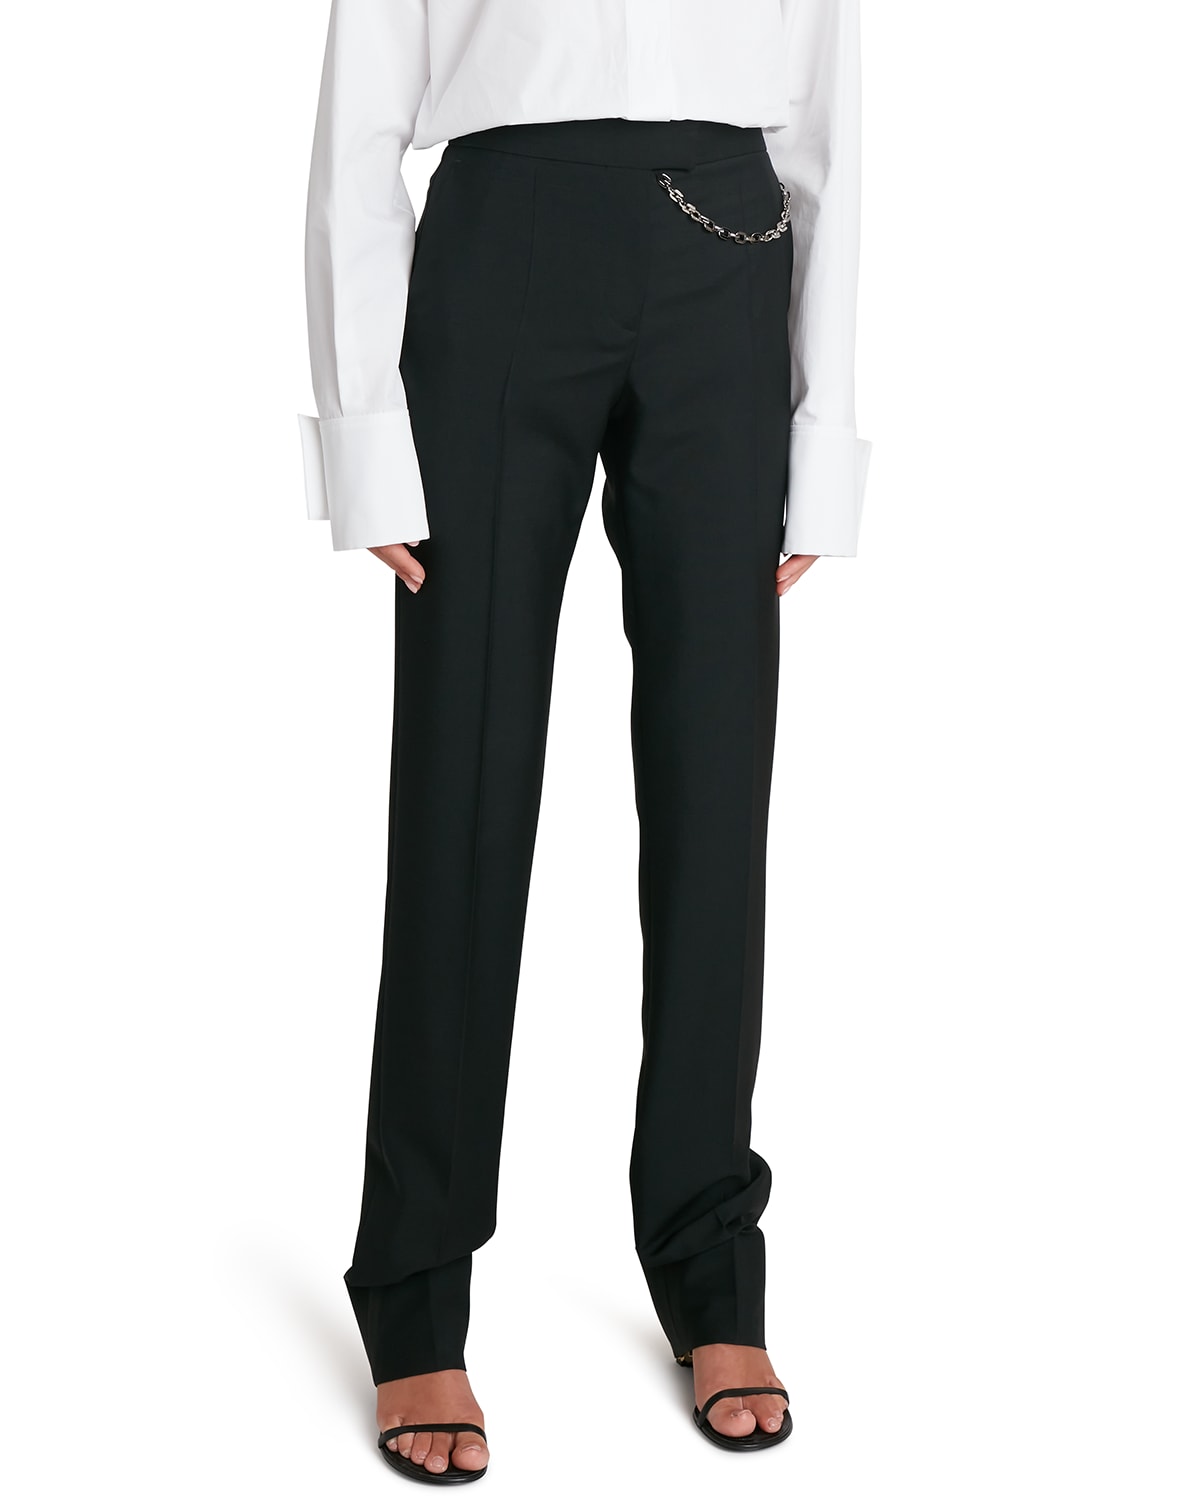 Givenchy Pants | Neiman Marcus